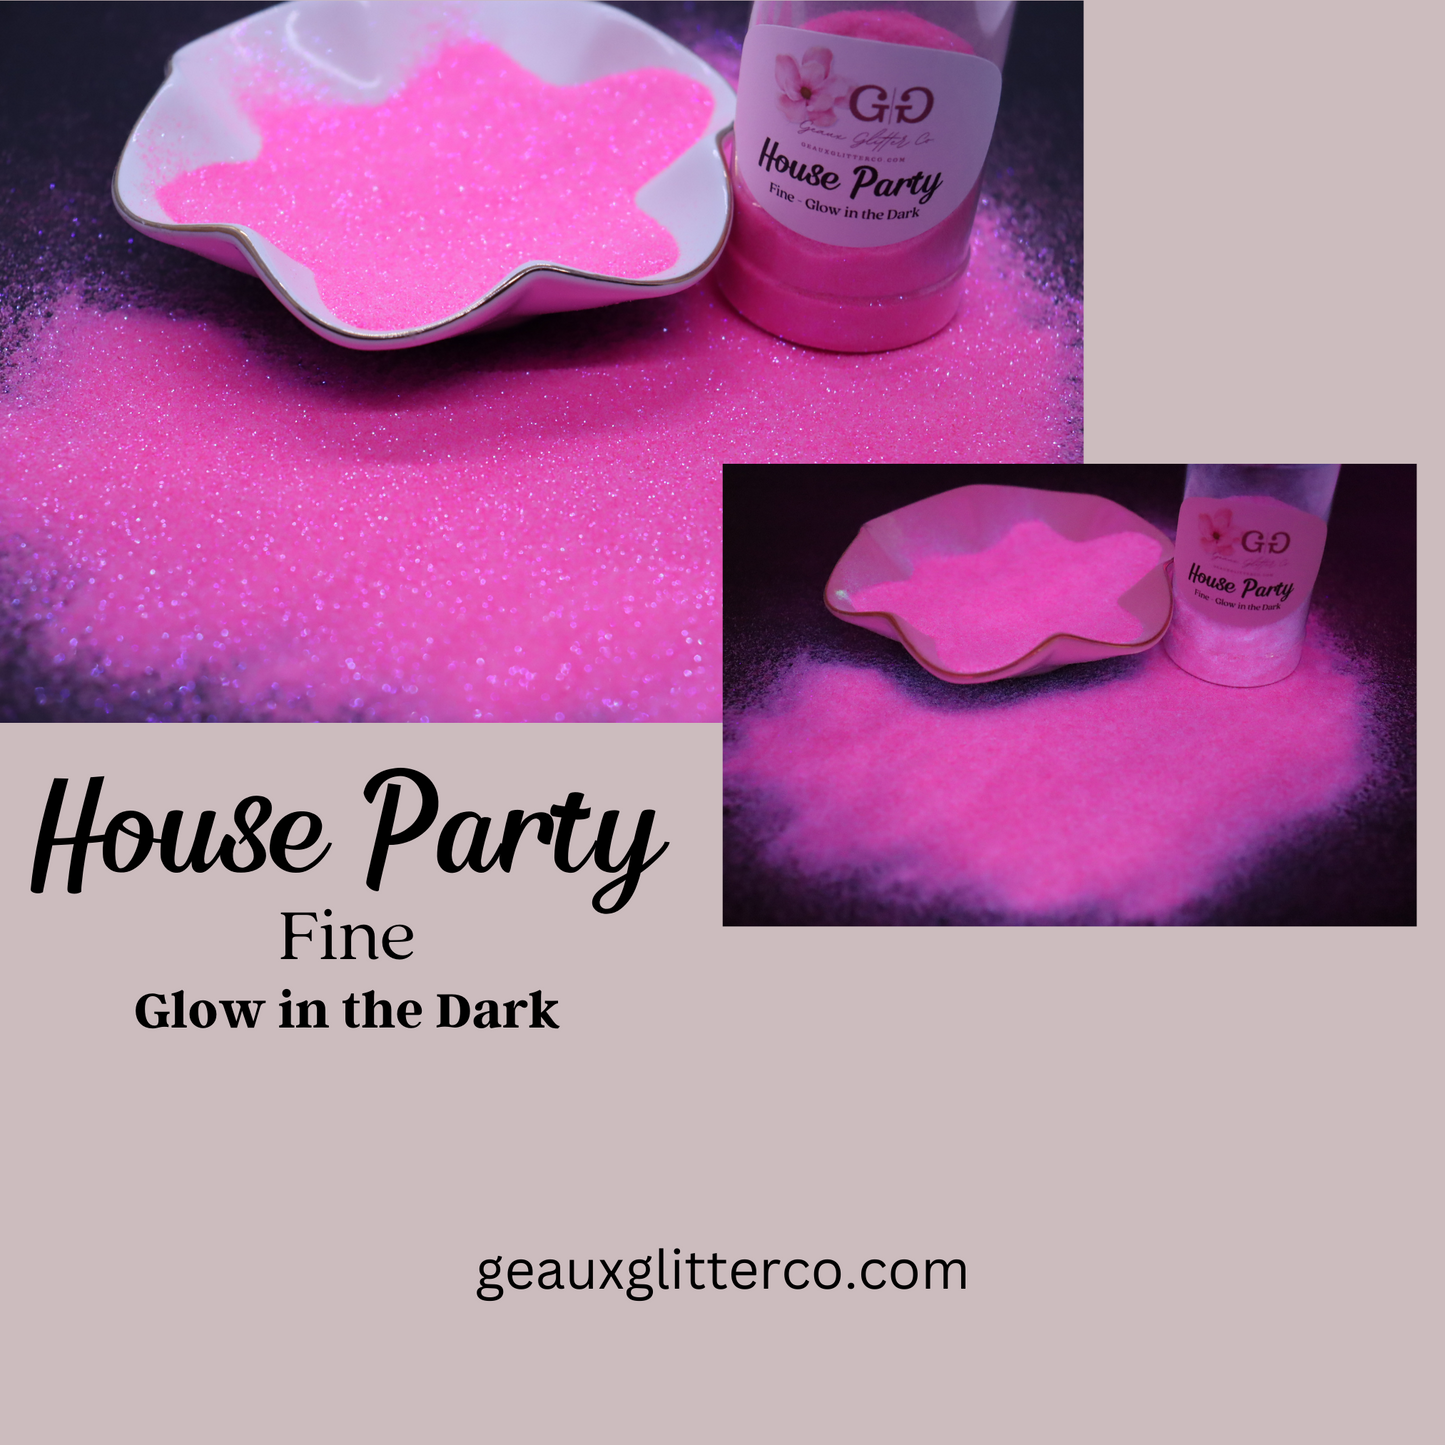 House Party Fine - Glow in the Dark